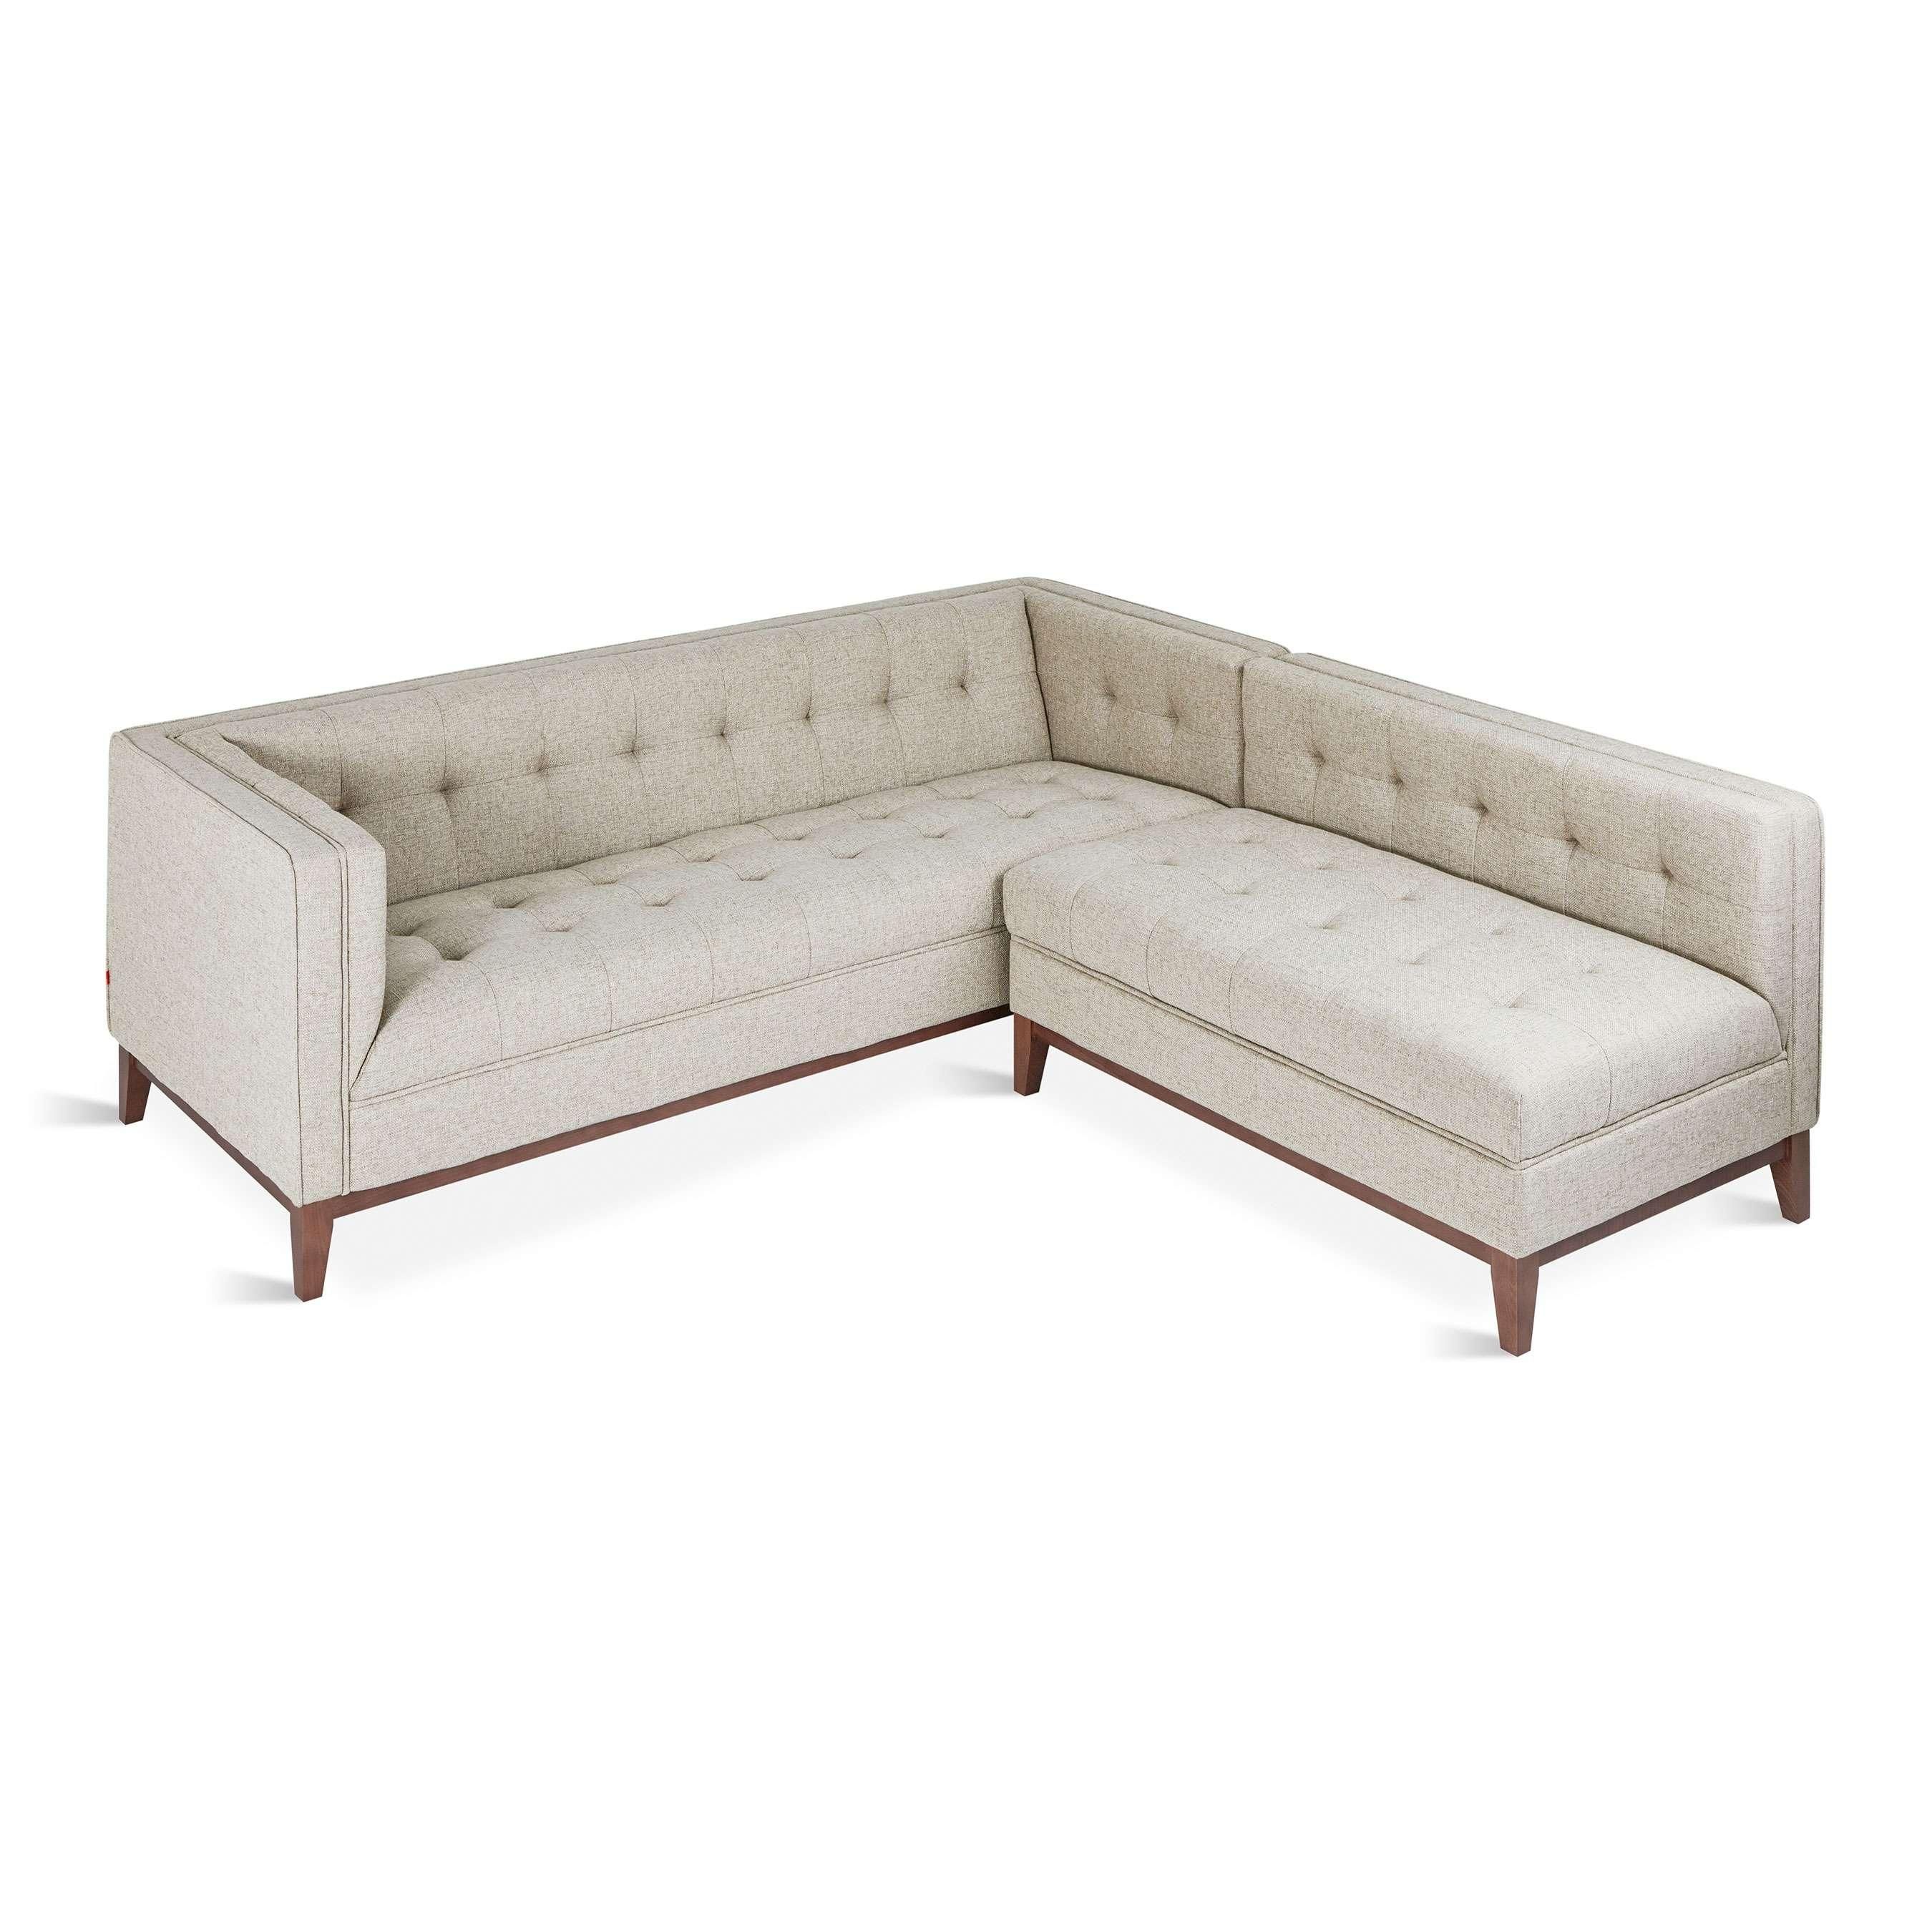 Modern Sofas & Couches | Yliving Intended For Modern Sofas (View 17 of 20)